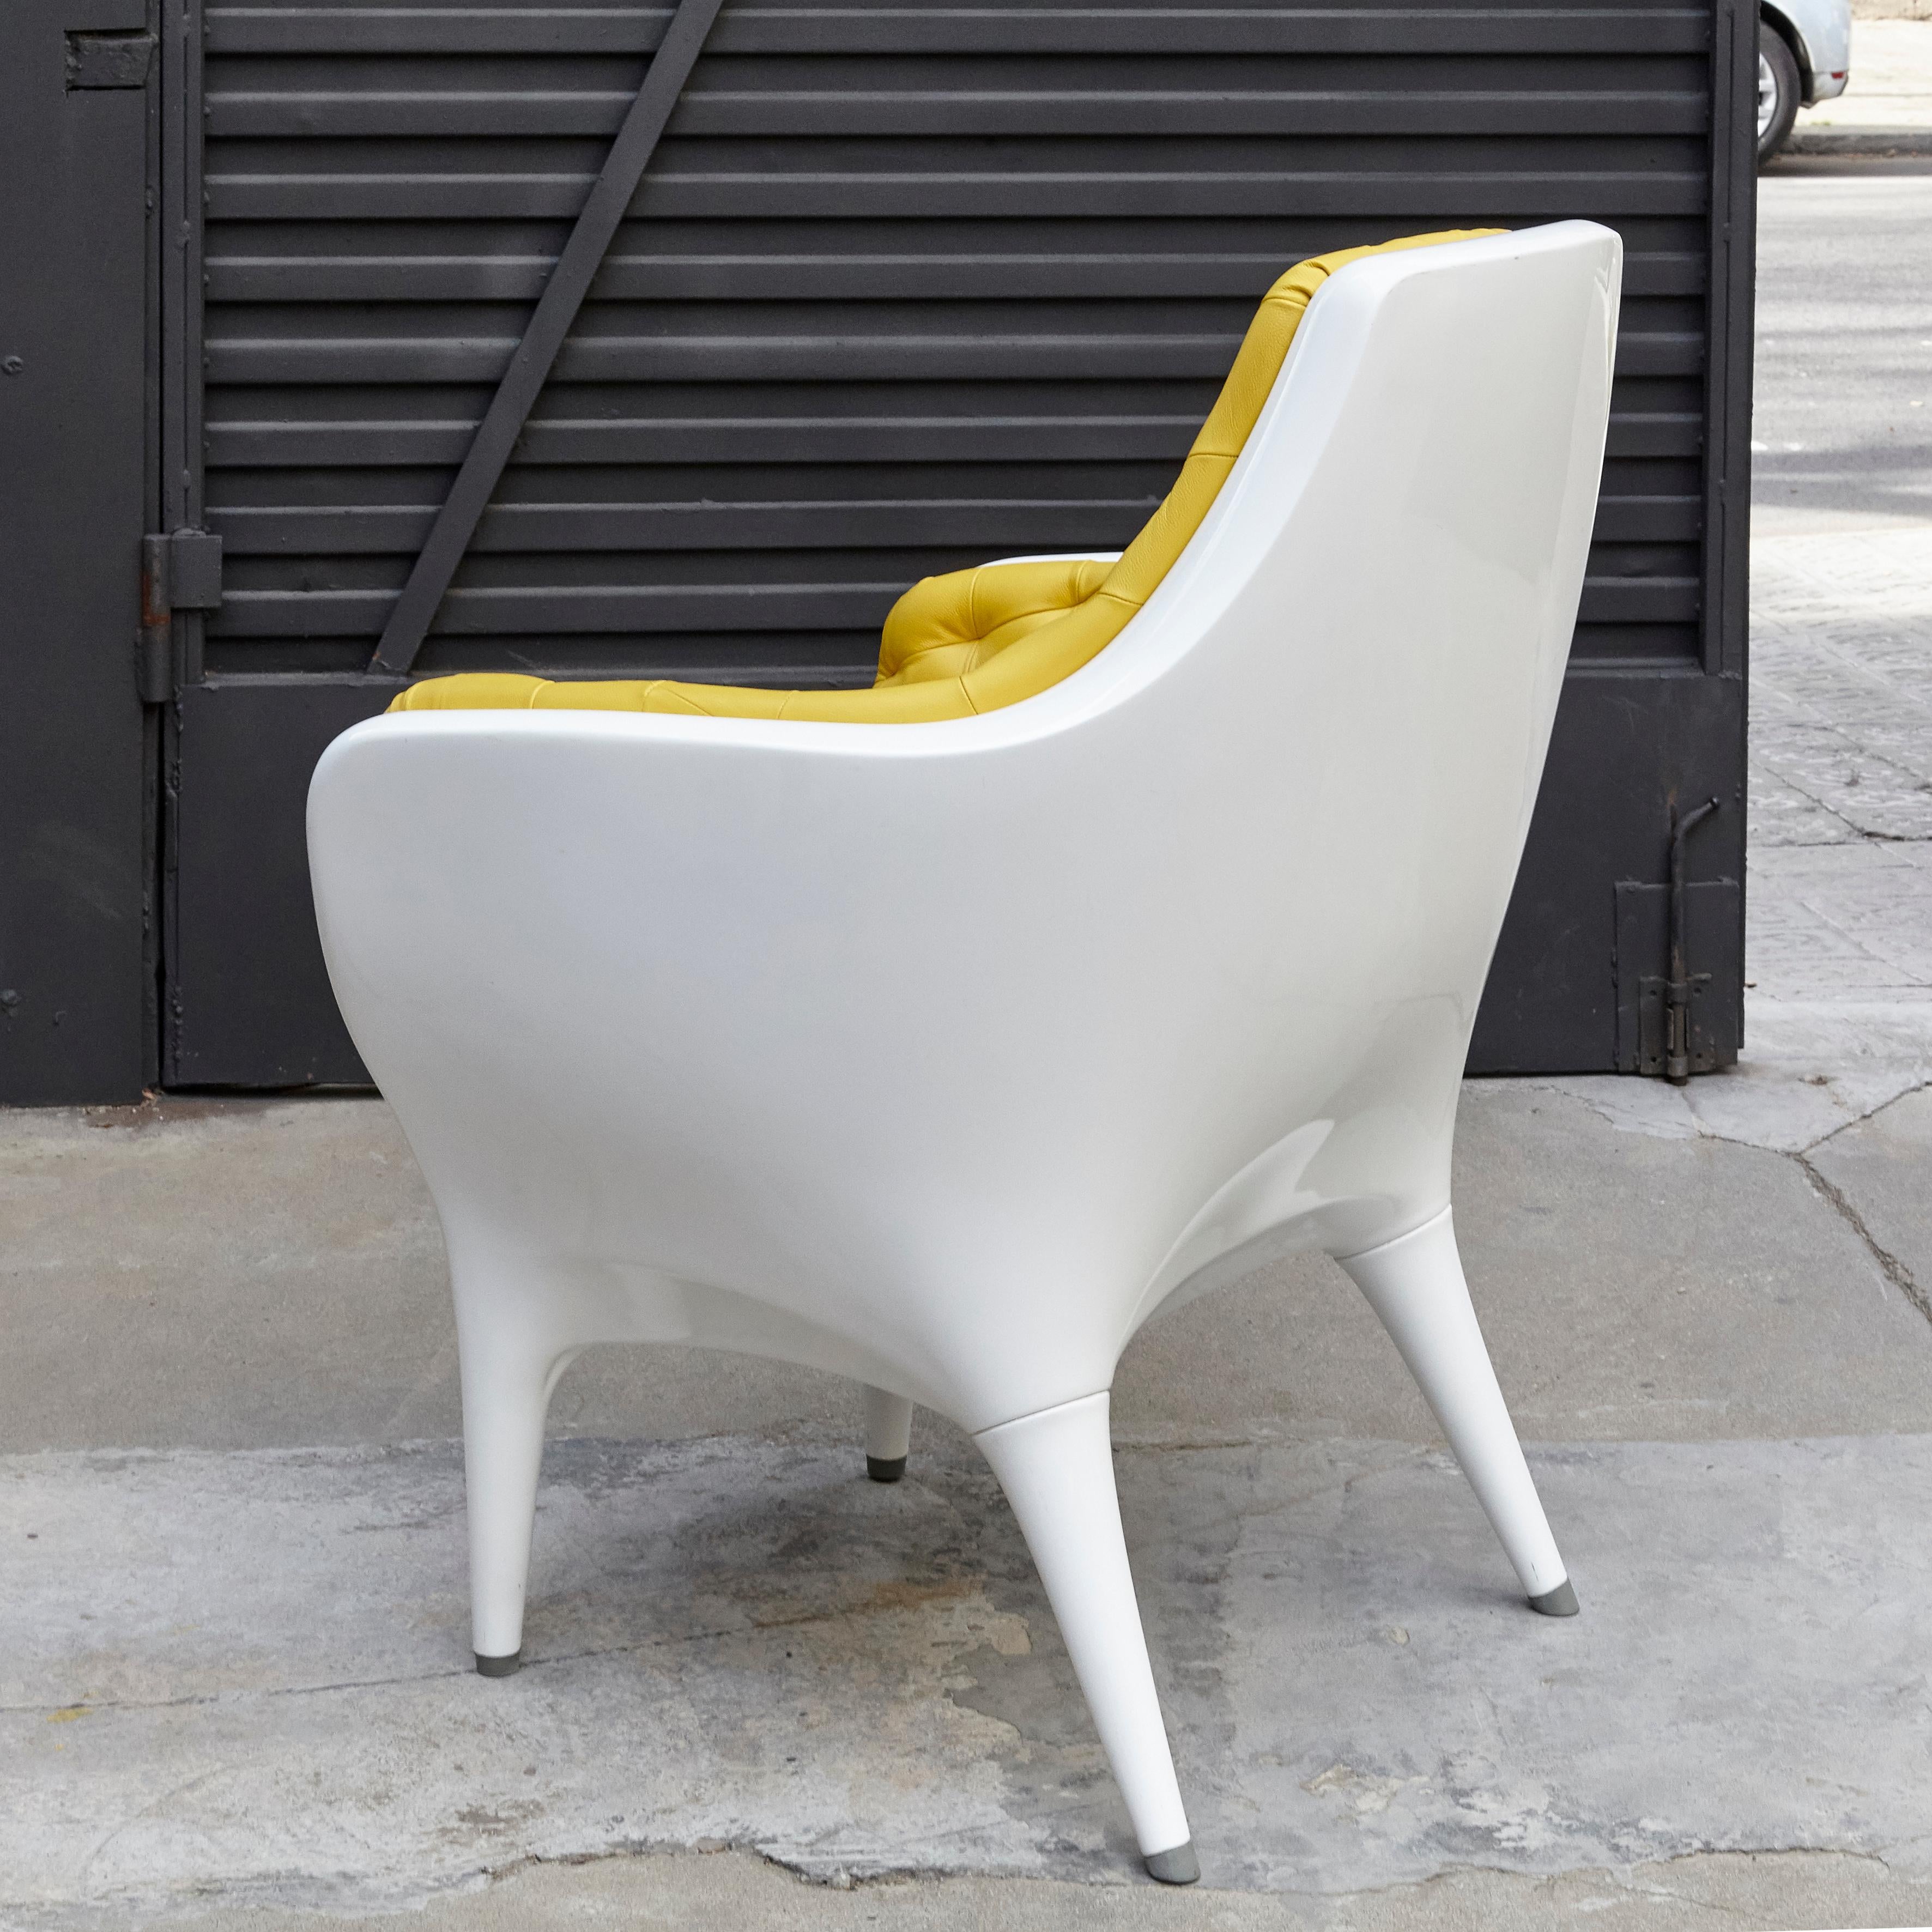 Jaime Hayon Contemporary Showtime Armchair Lacquered White and Yellow 1